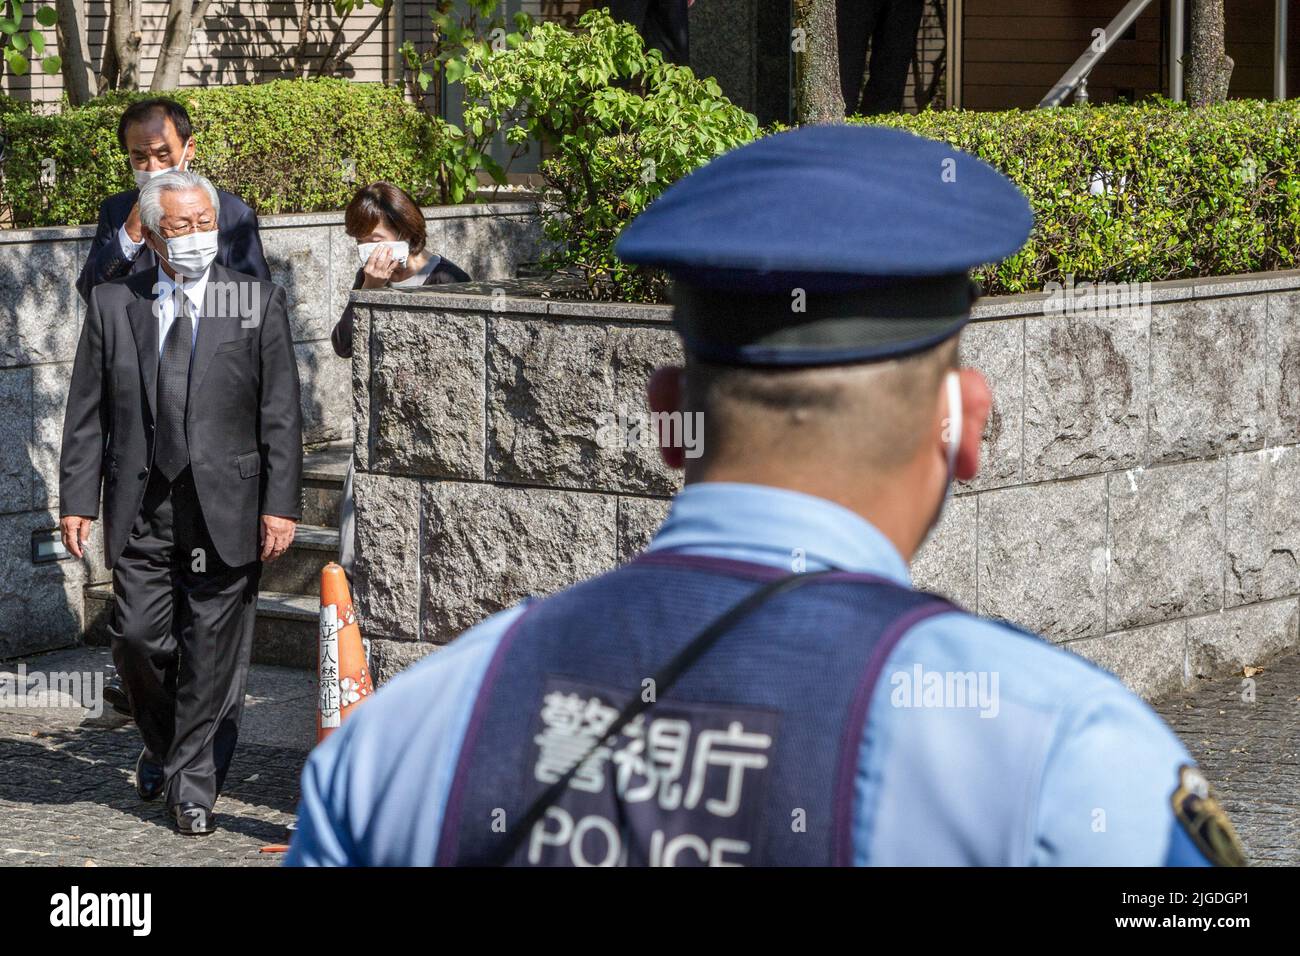 Tokyo, Japan. 09th July, 2022. Liberal Democratic Party (LDP) politicians leave after paying their respects, watched by police, outside the residence of former Japanese Prime Minister. Shinzo Abe was Japan's longest serving PM (2012-2020) and had been campaigning for his LDP party's candidates in the upcoming House of Councilors' election in the western city of Nara when he was shot and killed by a lone gunman on July 8th. Credit: SOPA Images Limited/Alamy Live News Stock Photo